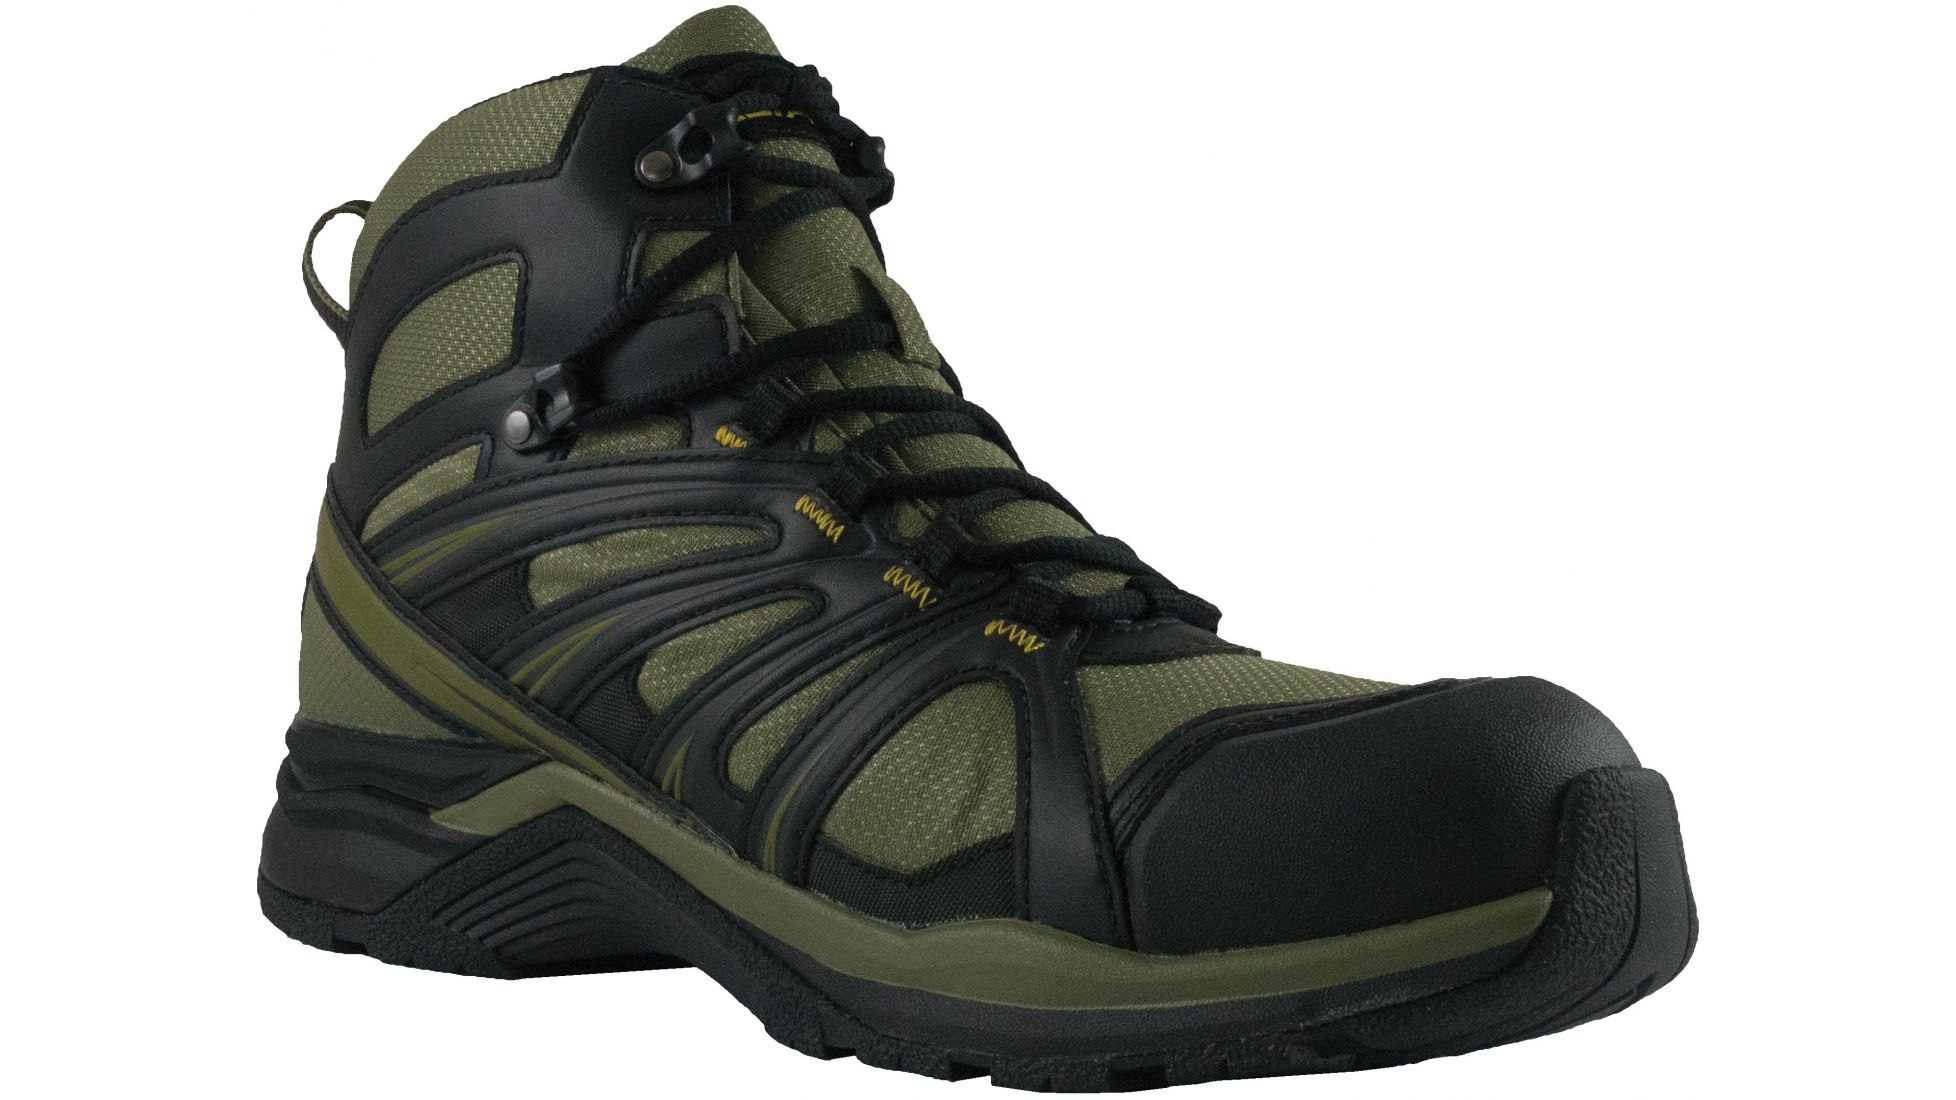 Altama Aboottabad Trail Mid Waterproof Boot - Mens | 4 Star Rating Free